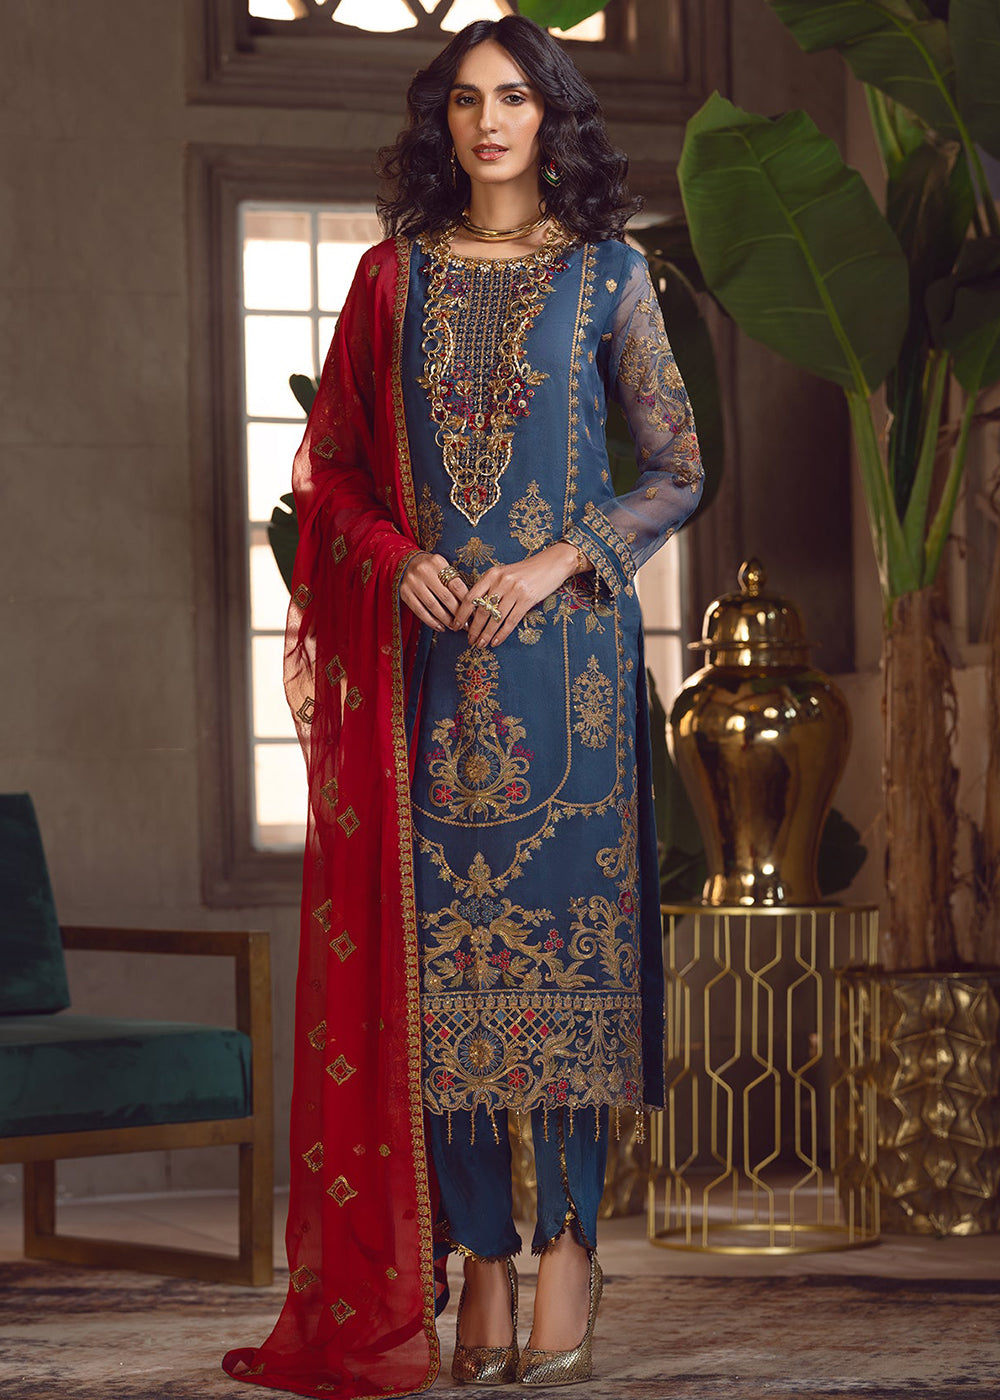 Buy Now Blue Pakistani Organza Suit | Emaan Adeel | Le Festa Formal Edit 7 | LF-703 Online in USA, UK, Canada & Worldwide at Empress Clothing. 